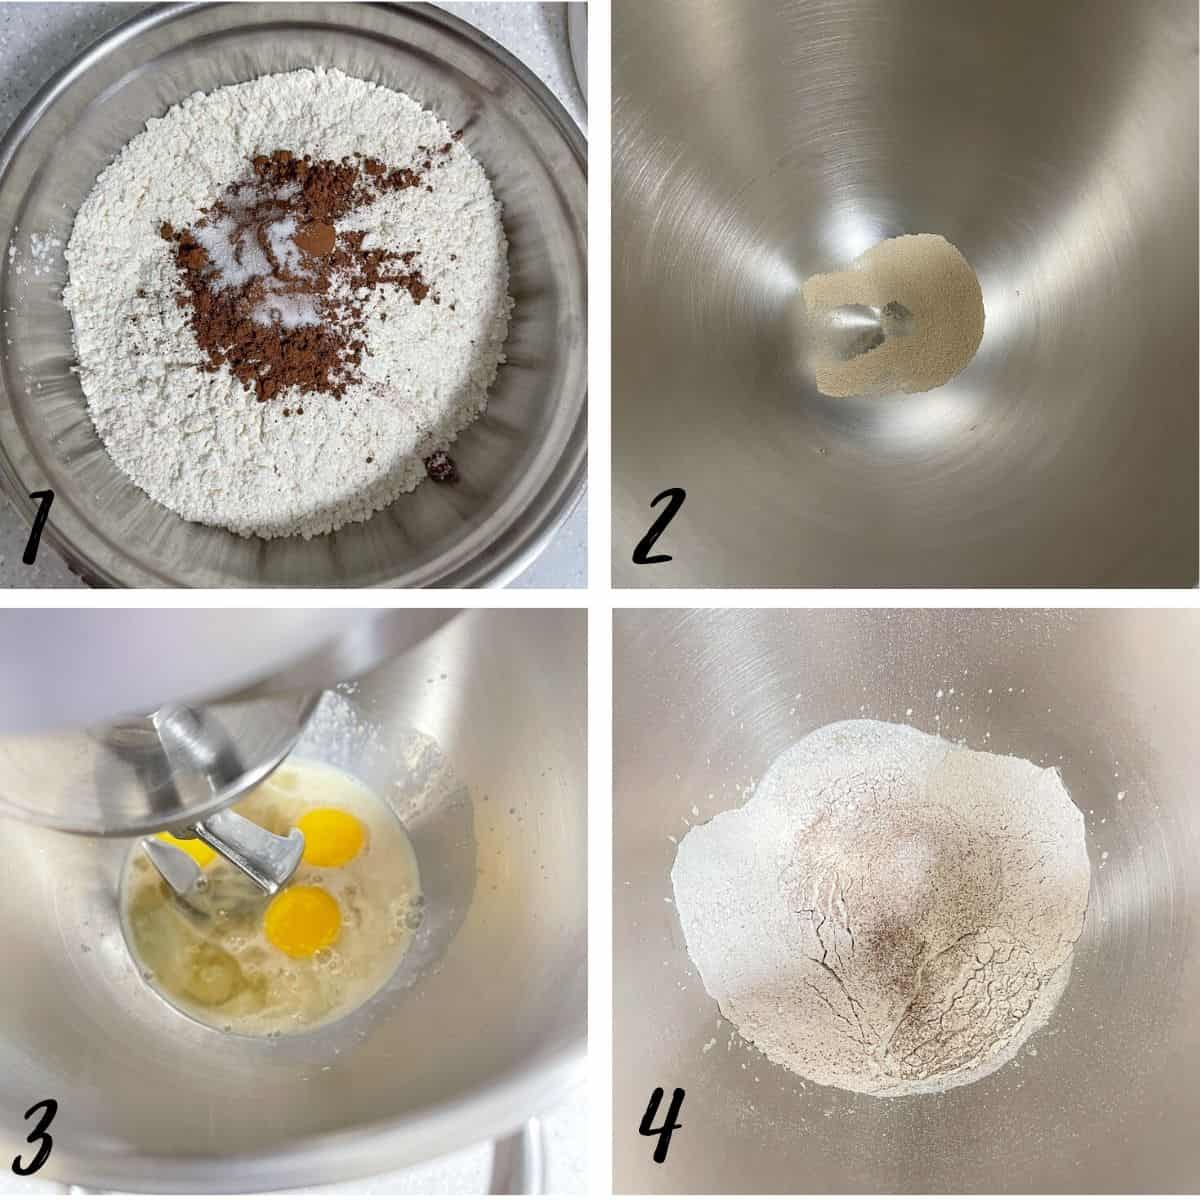 A poster of 4 images showing how to mix yeast, eggs, milk, sugar and flour to make chocolate brioche